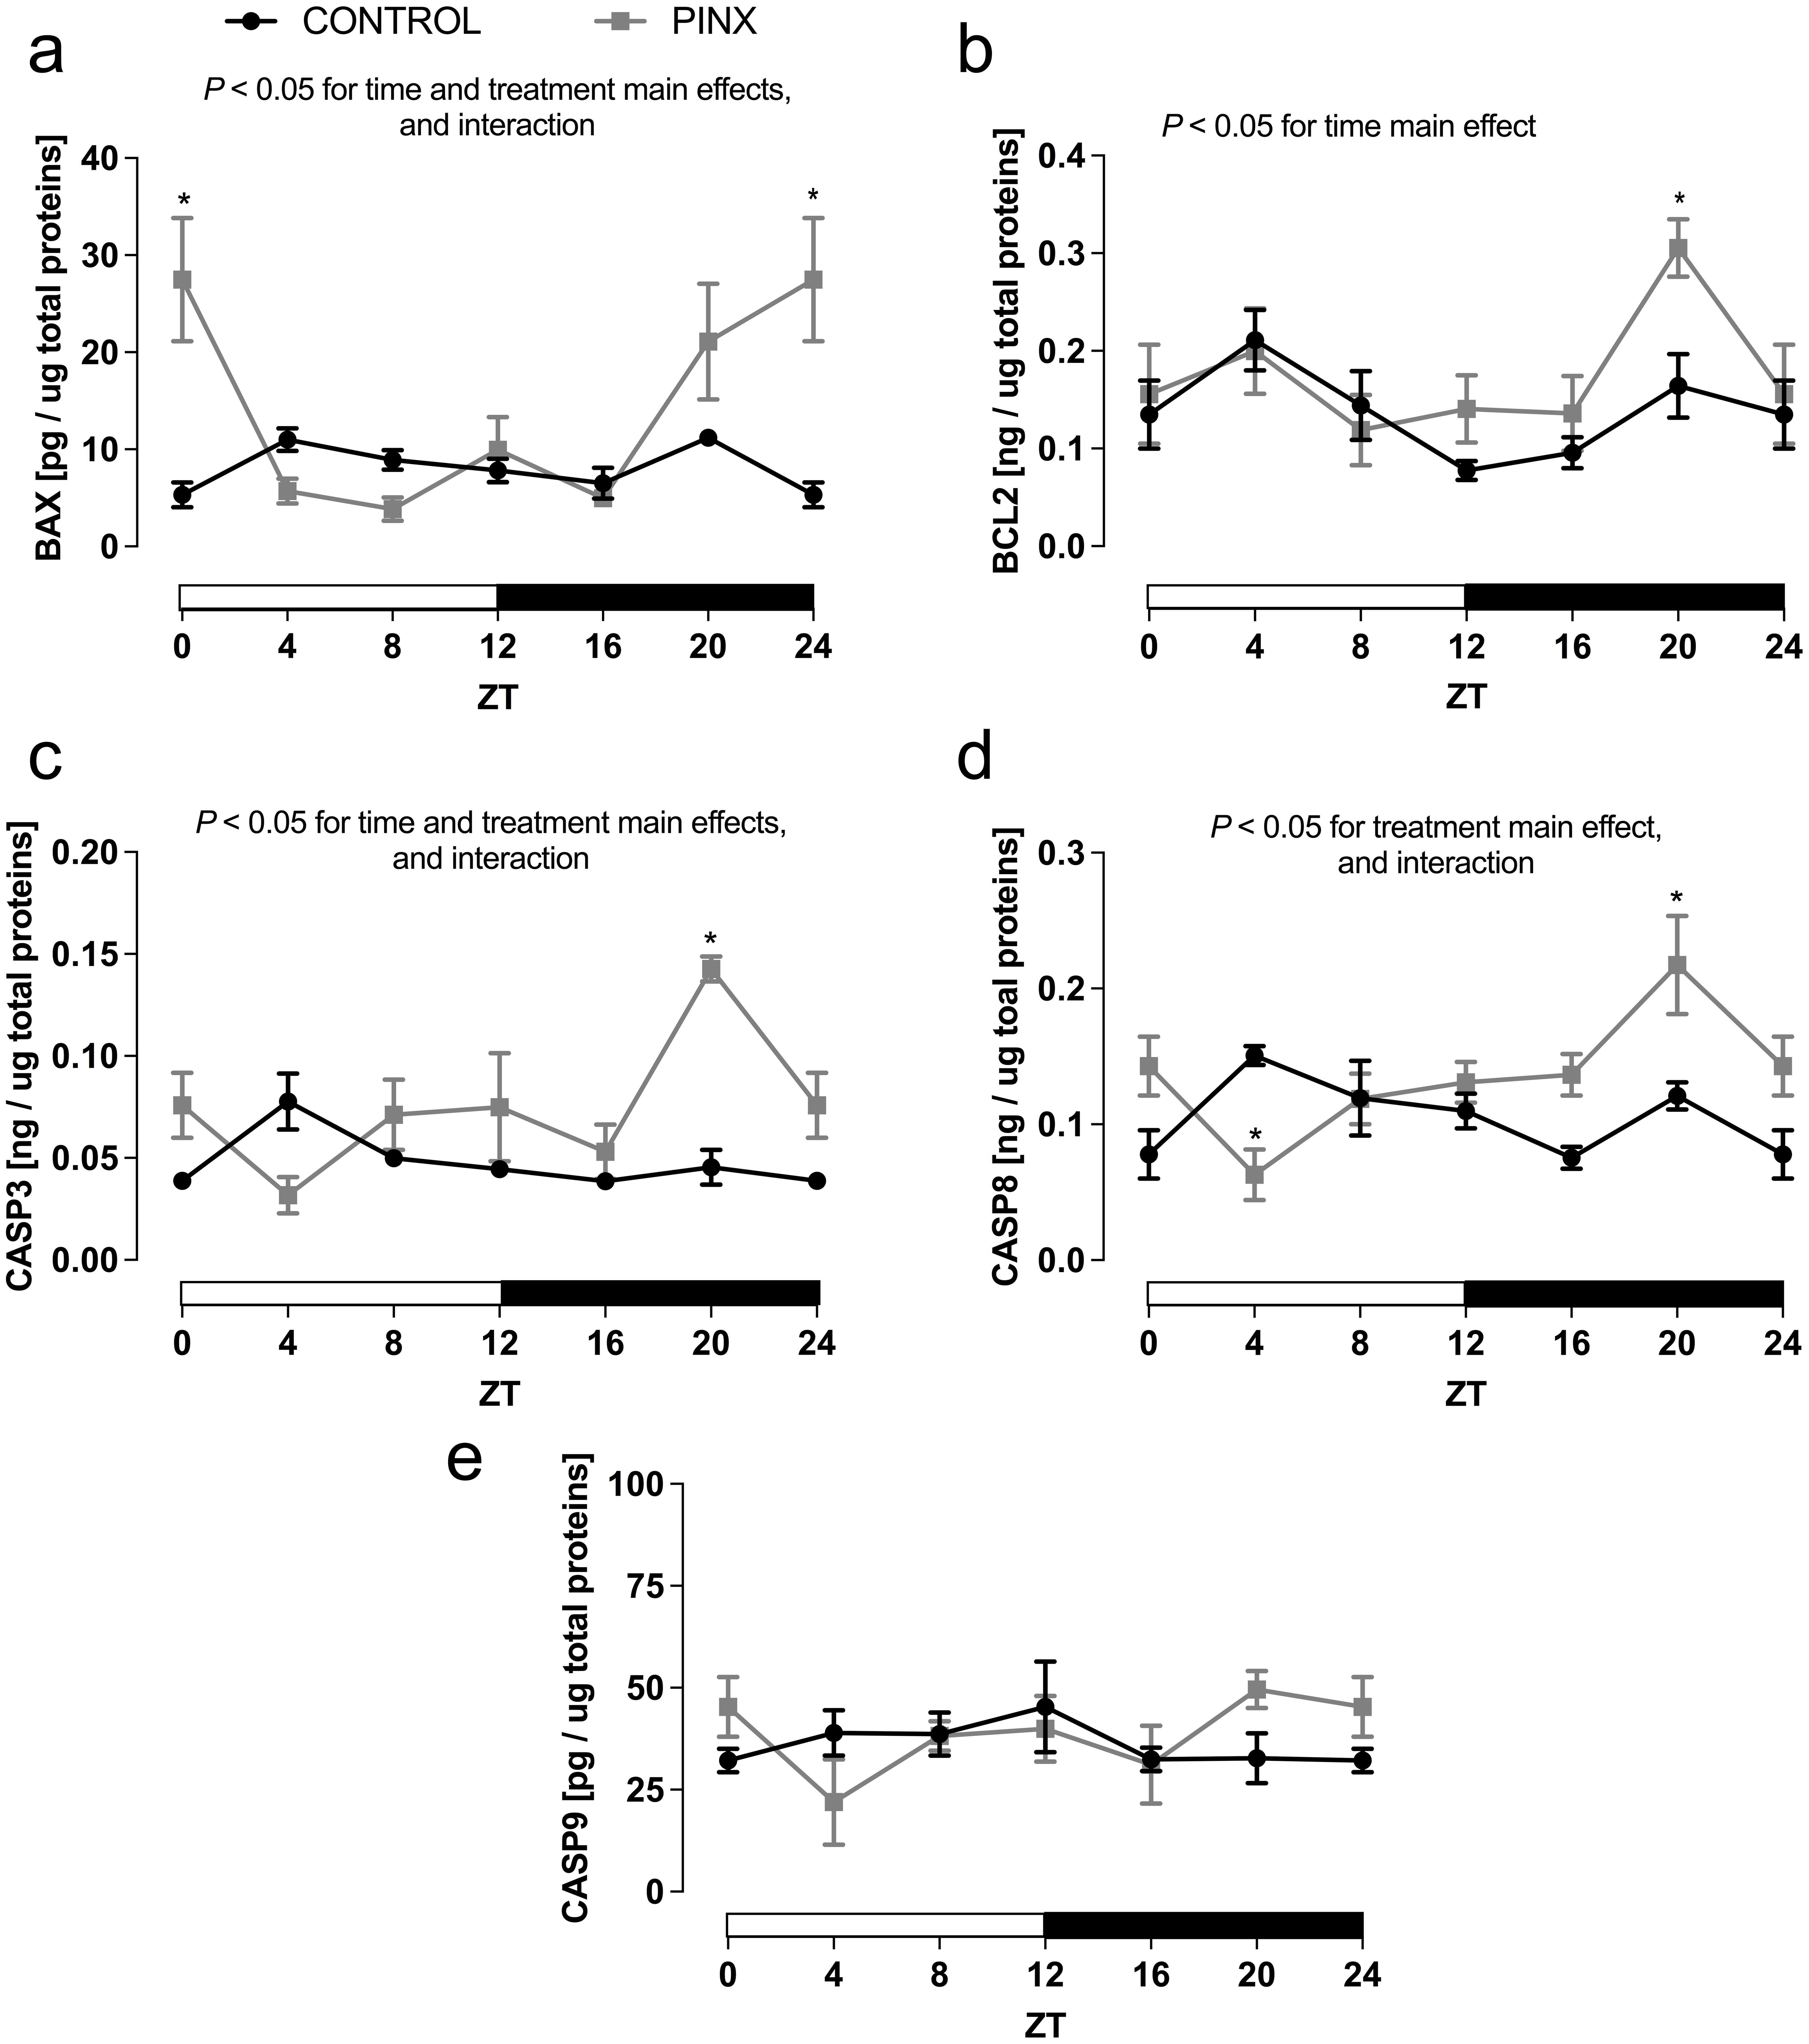 Effects of pinealectomy in apoptotic-related protein content in rat retroperitoneal adipose tissue (RP).